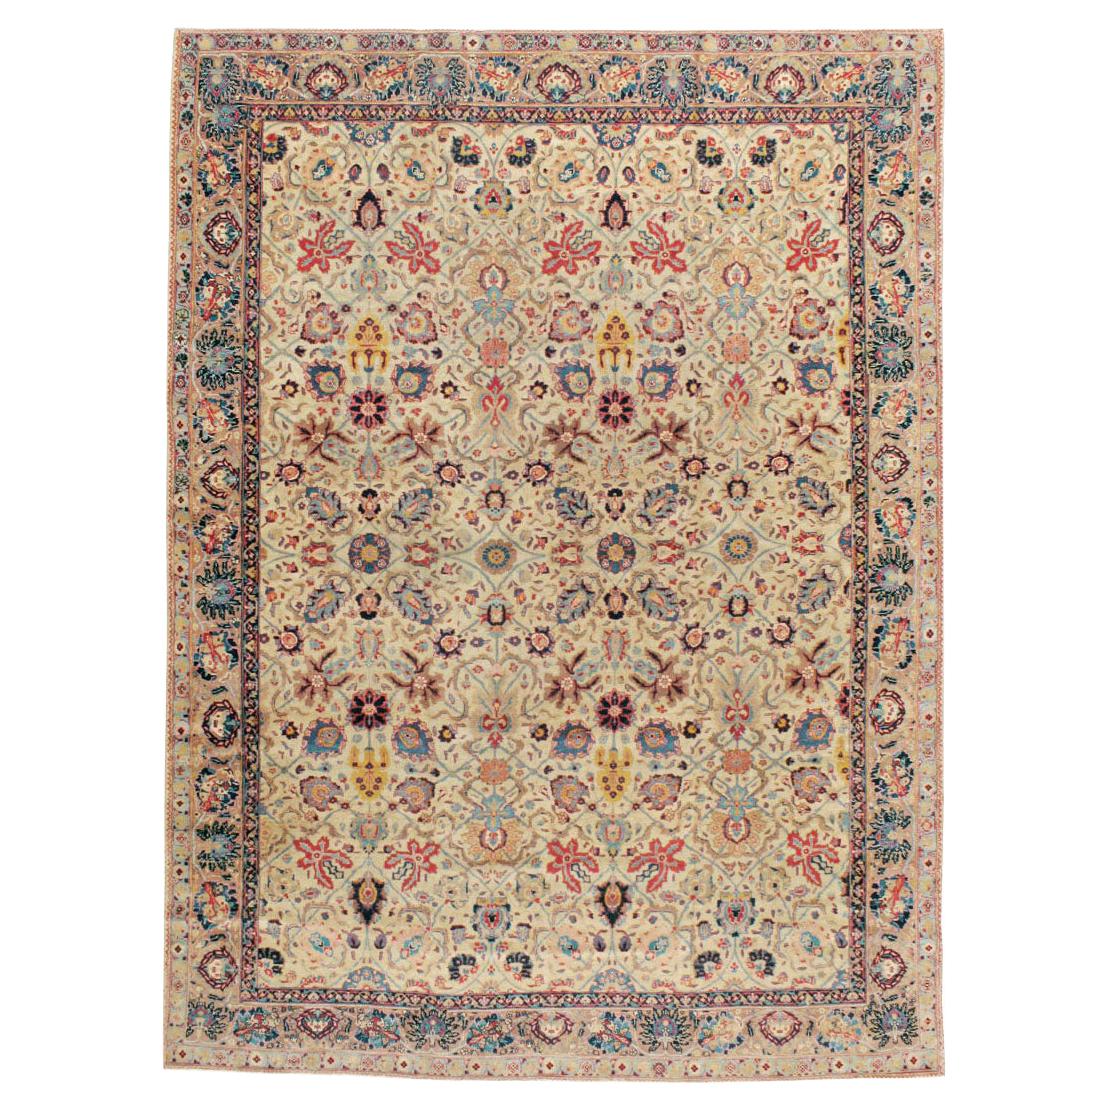 Early 20th Century Handmade Persian Tabriz Small Room Size Carpet in Jewel Tones For Sale